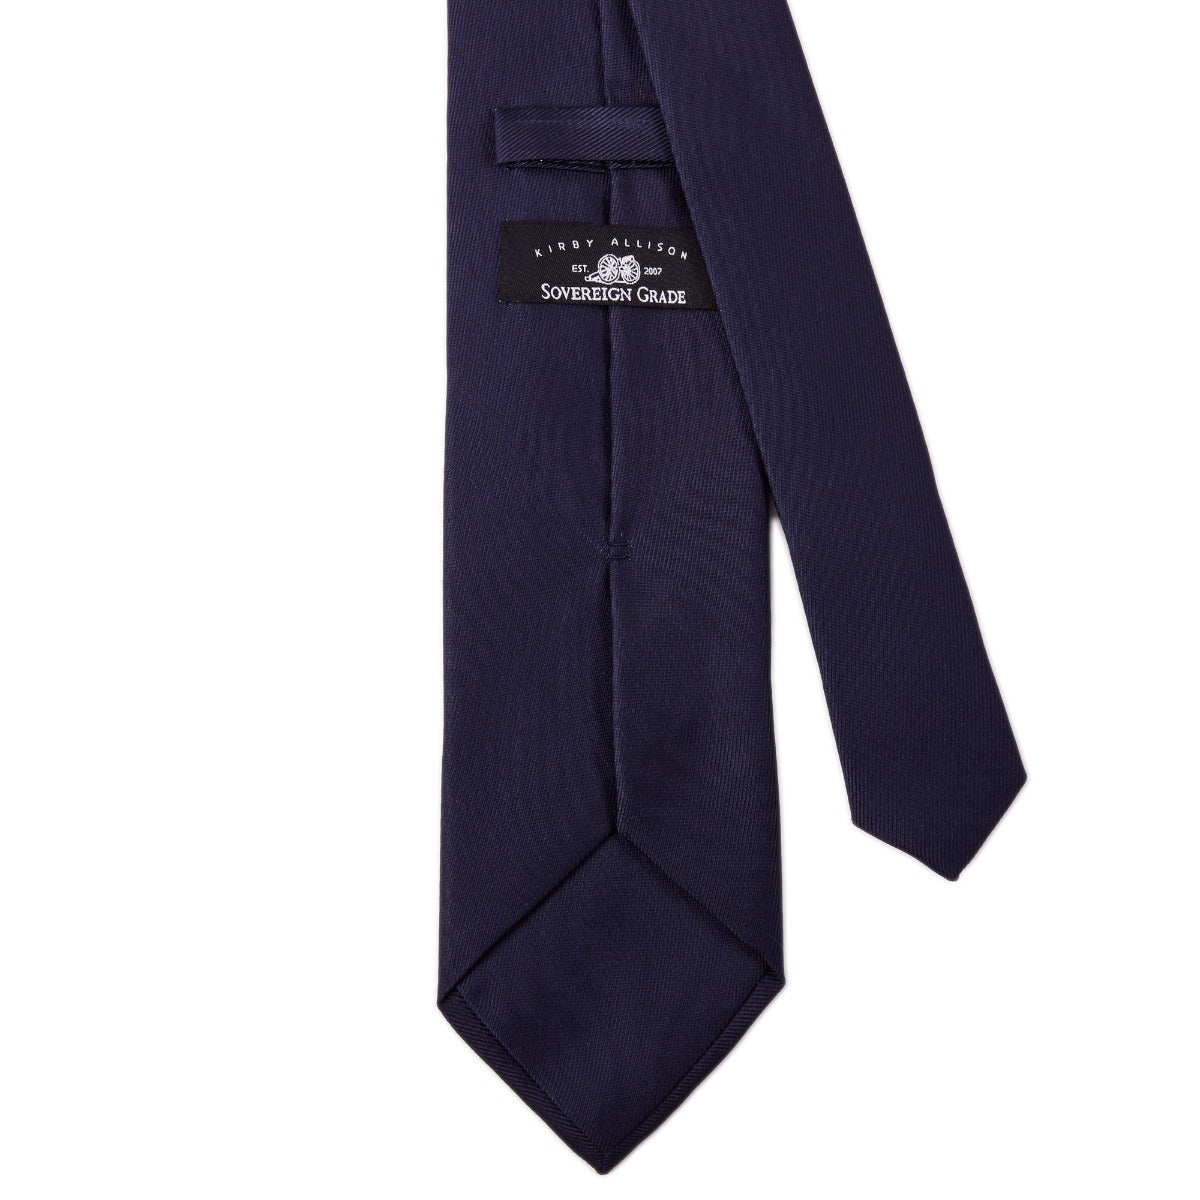 A Sovereign Grade 50oz Navy Horizontal Solid Twill Silk Tie from KirbyAllison.com on a white background.